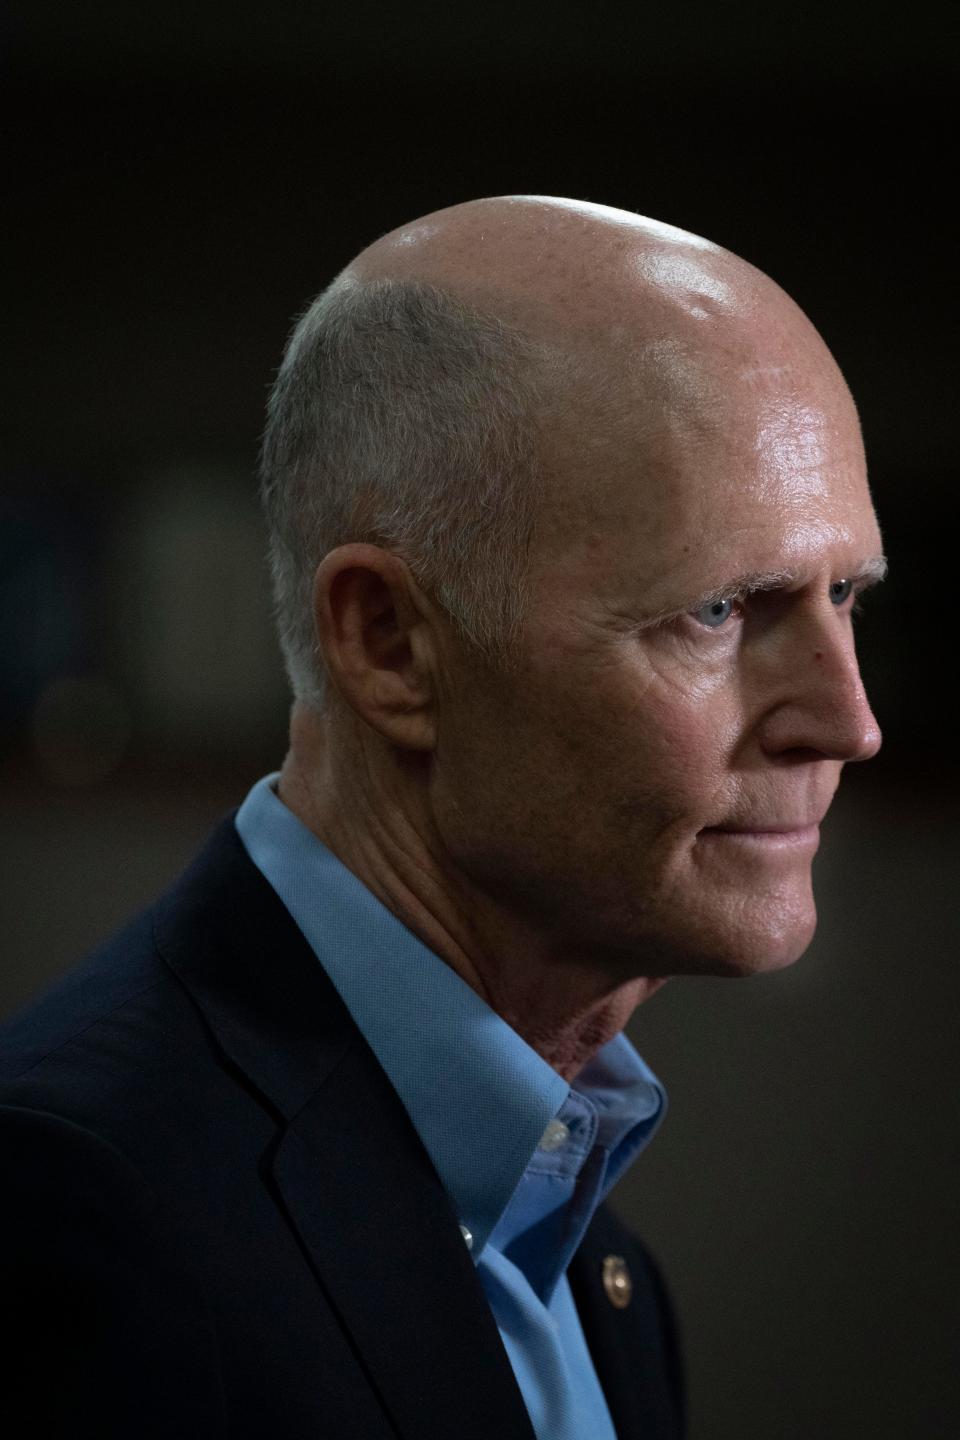 U.S. Senator Rick Scott speaks to the media after a roundtable discussion with local law enforcement leaders about border control and the deadly Fentanyl crisis during his visit to the West Palm Beach Police station on February 3, 2023.